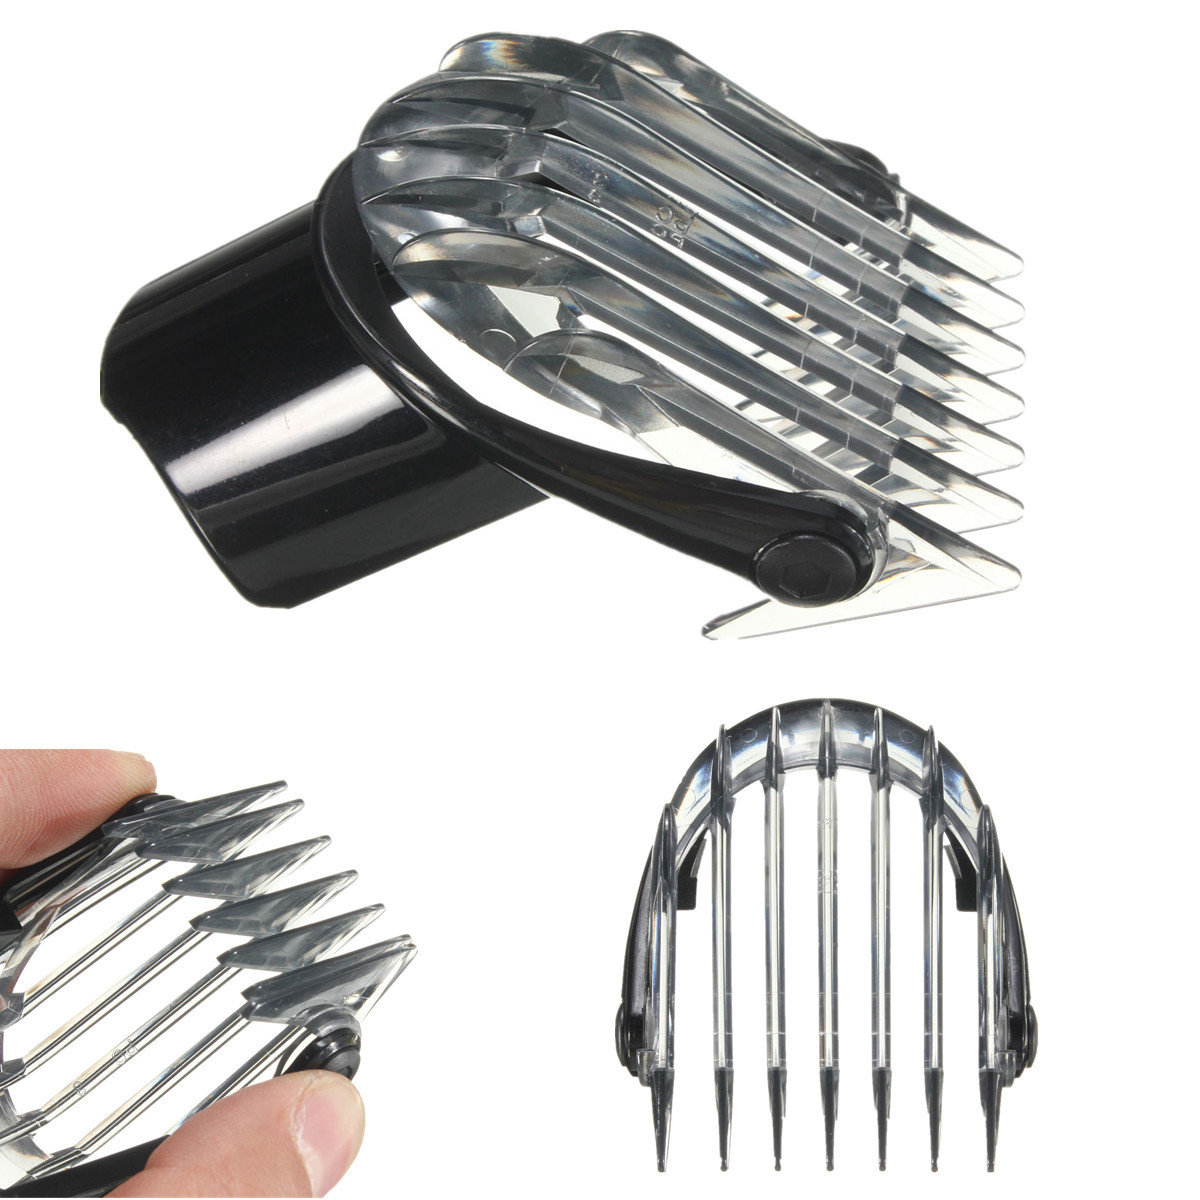 

3-21mm Hair Clipper Attachment Grooming Comb For Philips QC5010 QC5050 QC5070 QC5090